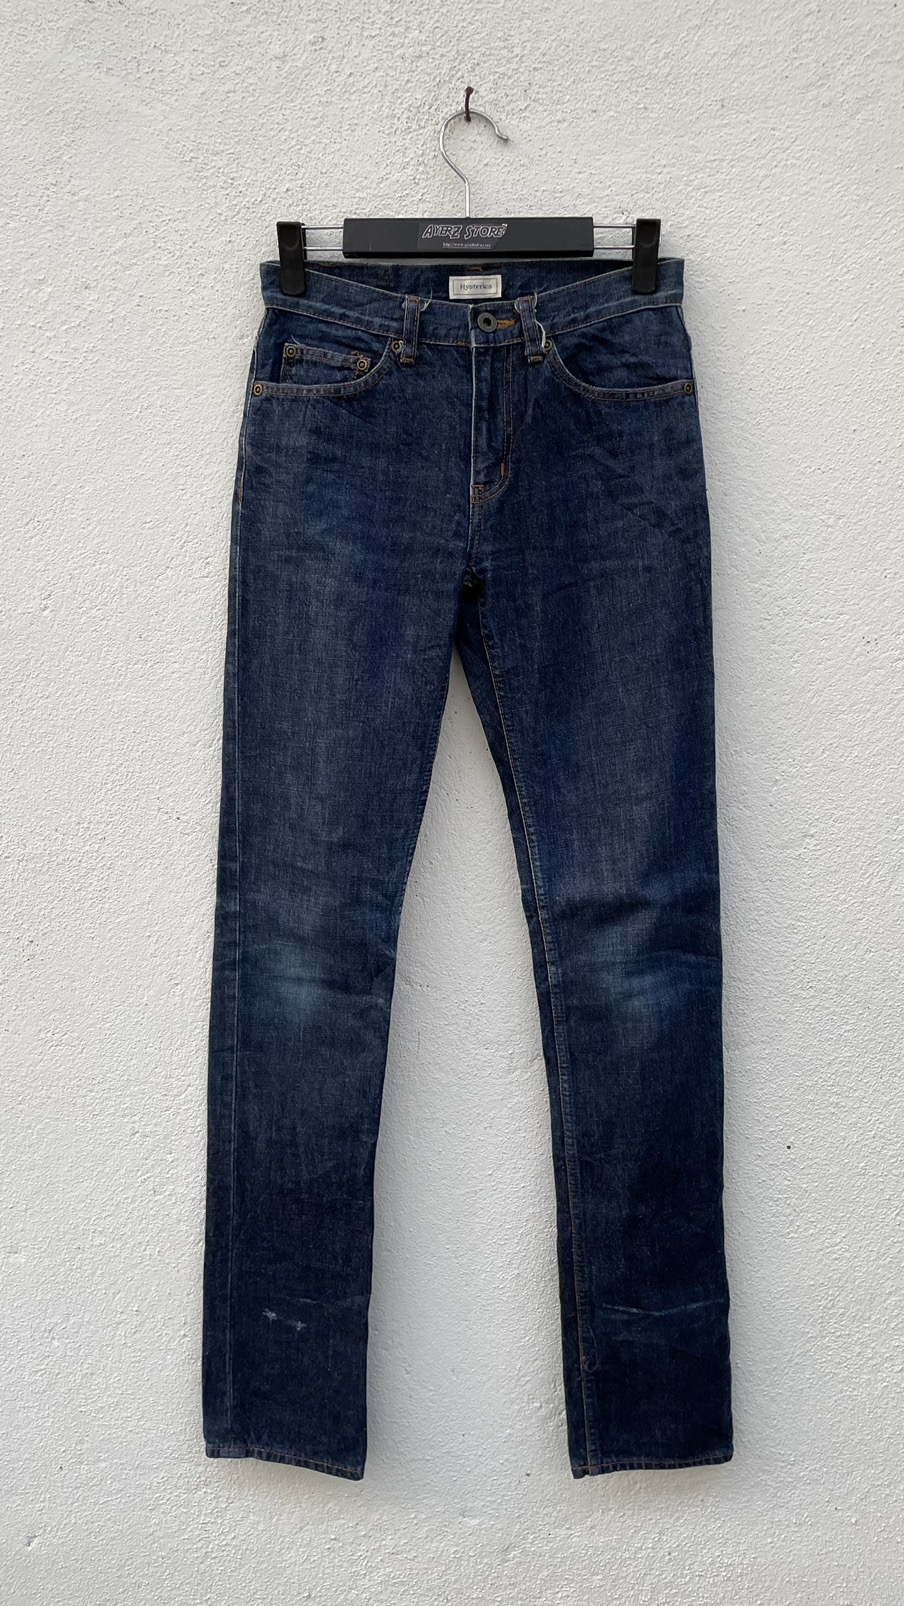 Hysteric Glamour Slim Fit Jeans - 1